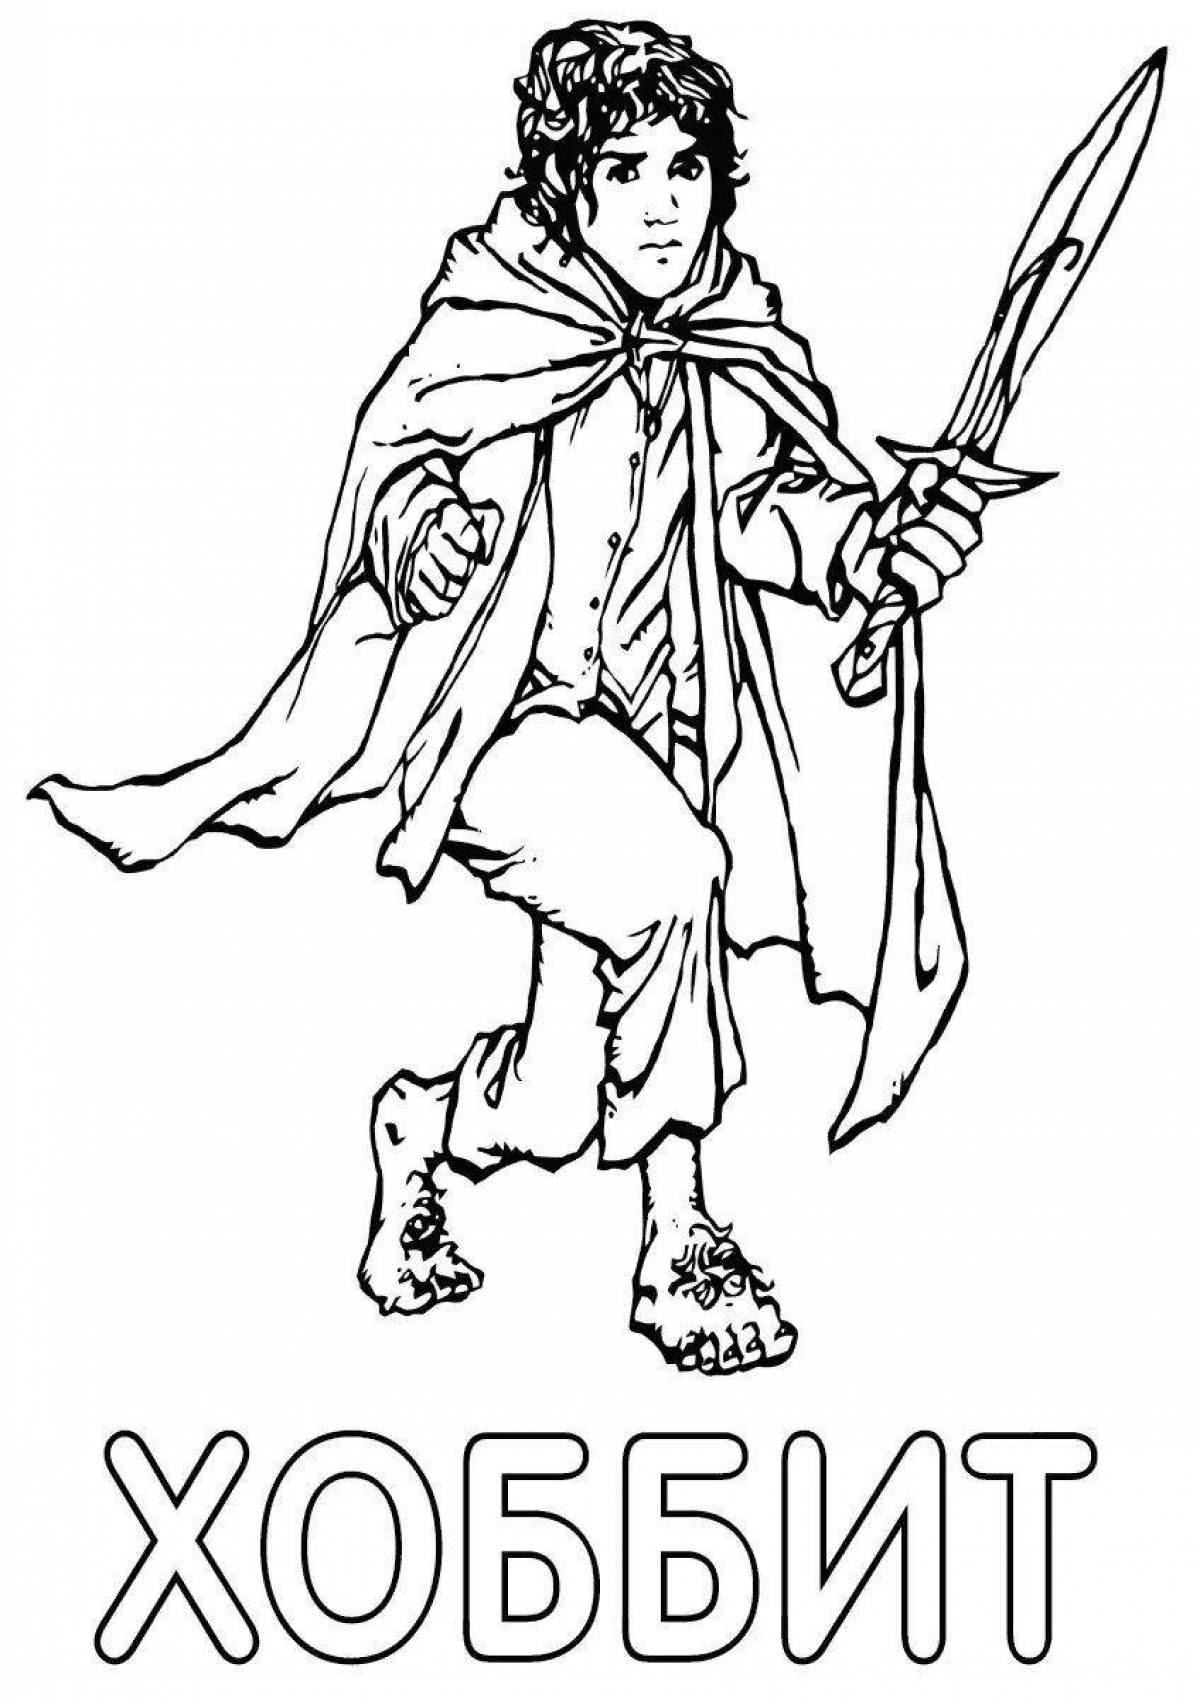 Tolkien's adorable coloring page